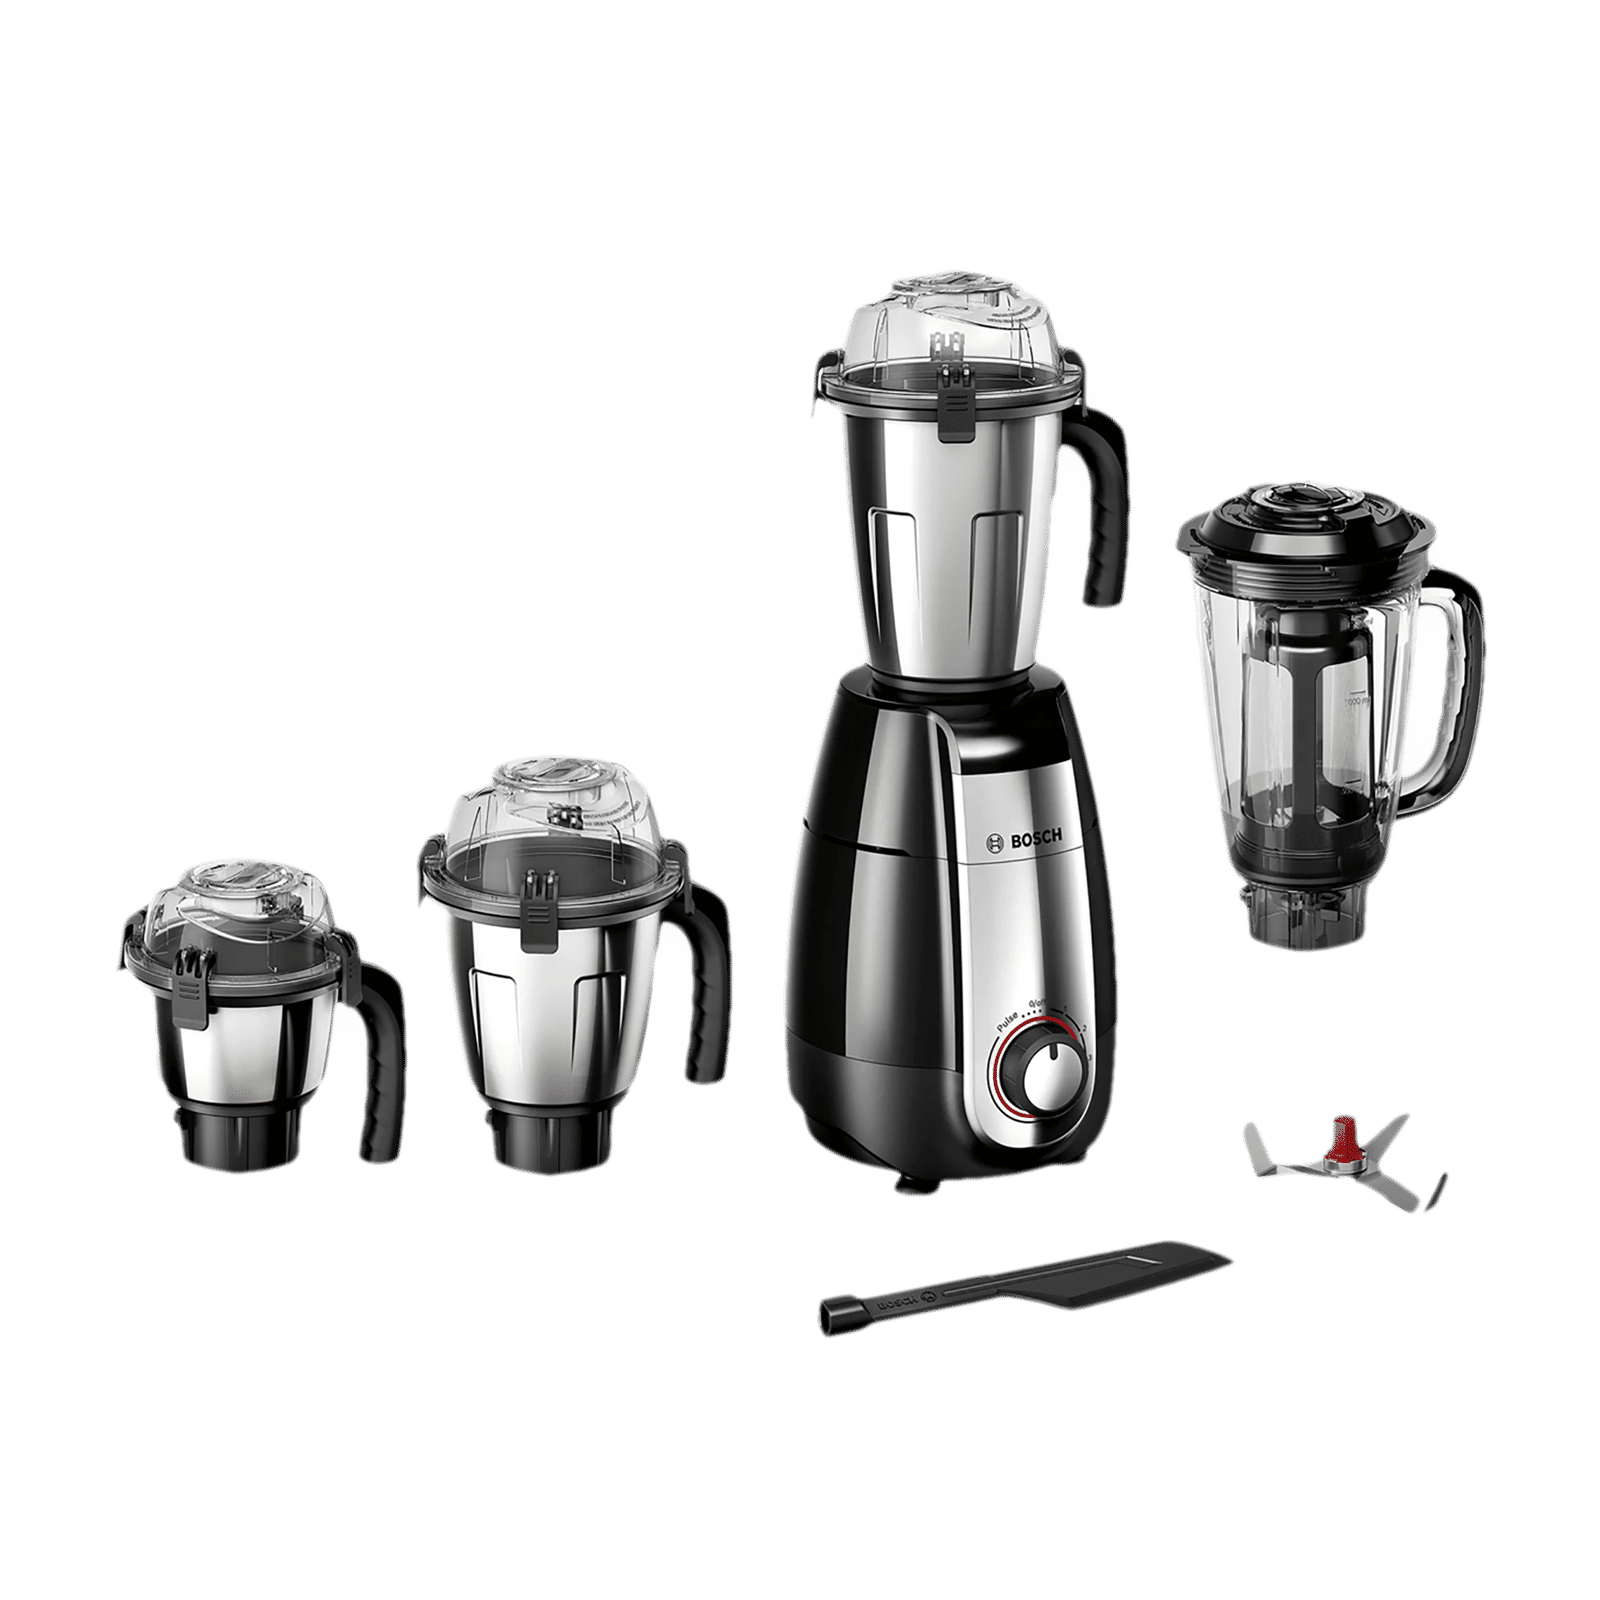 Amazon.com: Bosch MUM6N10UC Universal Plus Stand Mixer, 800 Watt,  6.5-Quarts with Bowl Scraper and Cake Paddles: Electric Stand Mixers: Home  & Kitchen